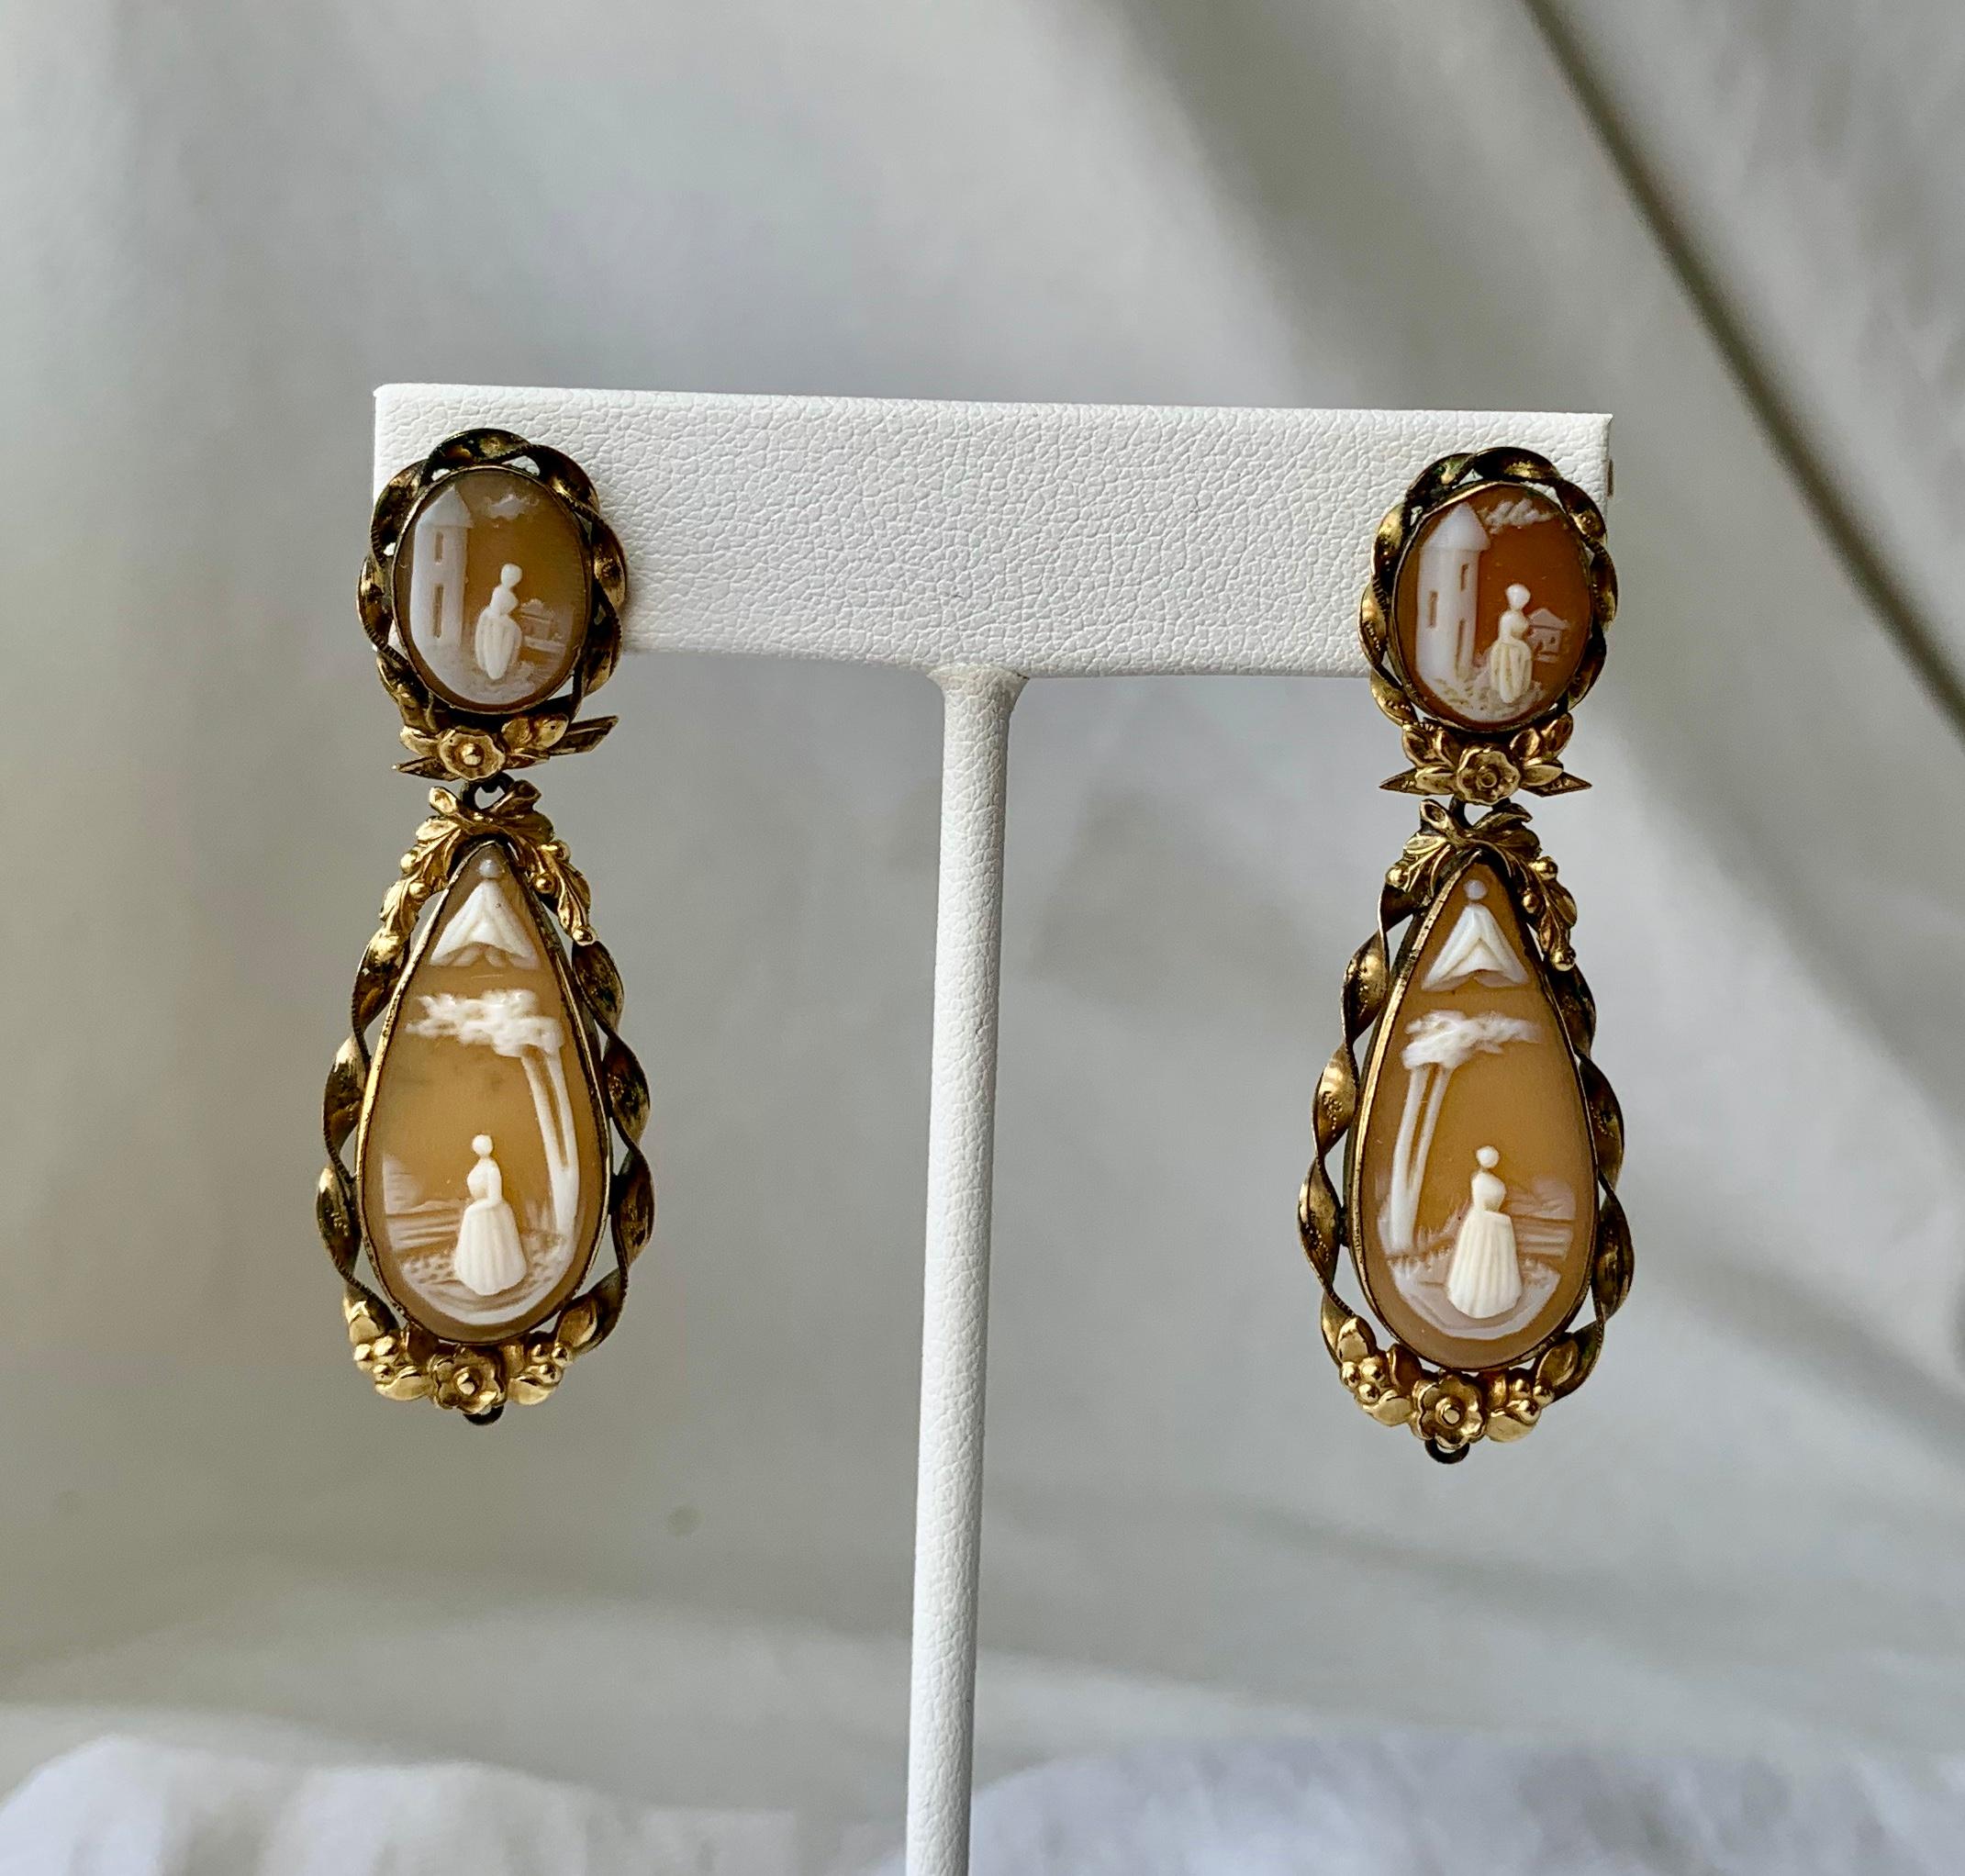 THIS IS AN ABSOLUTELY STUNNING AND VERY RARE PAIR OF VICTORIAN SHELL CAMEO PENDANT EARRINGS SET IN GOLD.  THE STUNNING HAND CARVED SHELL CAMEO EARRINGS ARE VERY EARLY, CIRCA 1850-1870 I BELIEVE.  IT IS VERY RARE TO FIND THESE LONG 2 1/8 INCH CAMEO